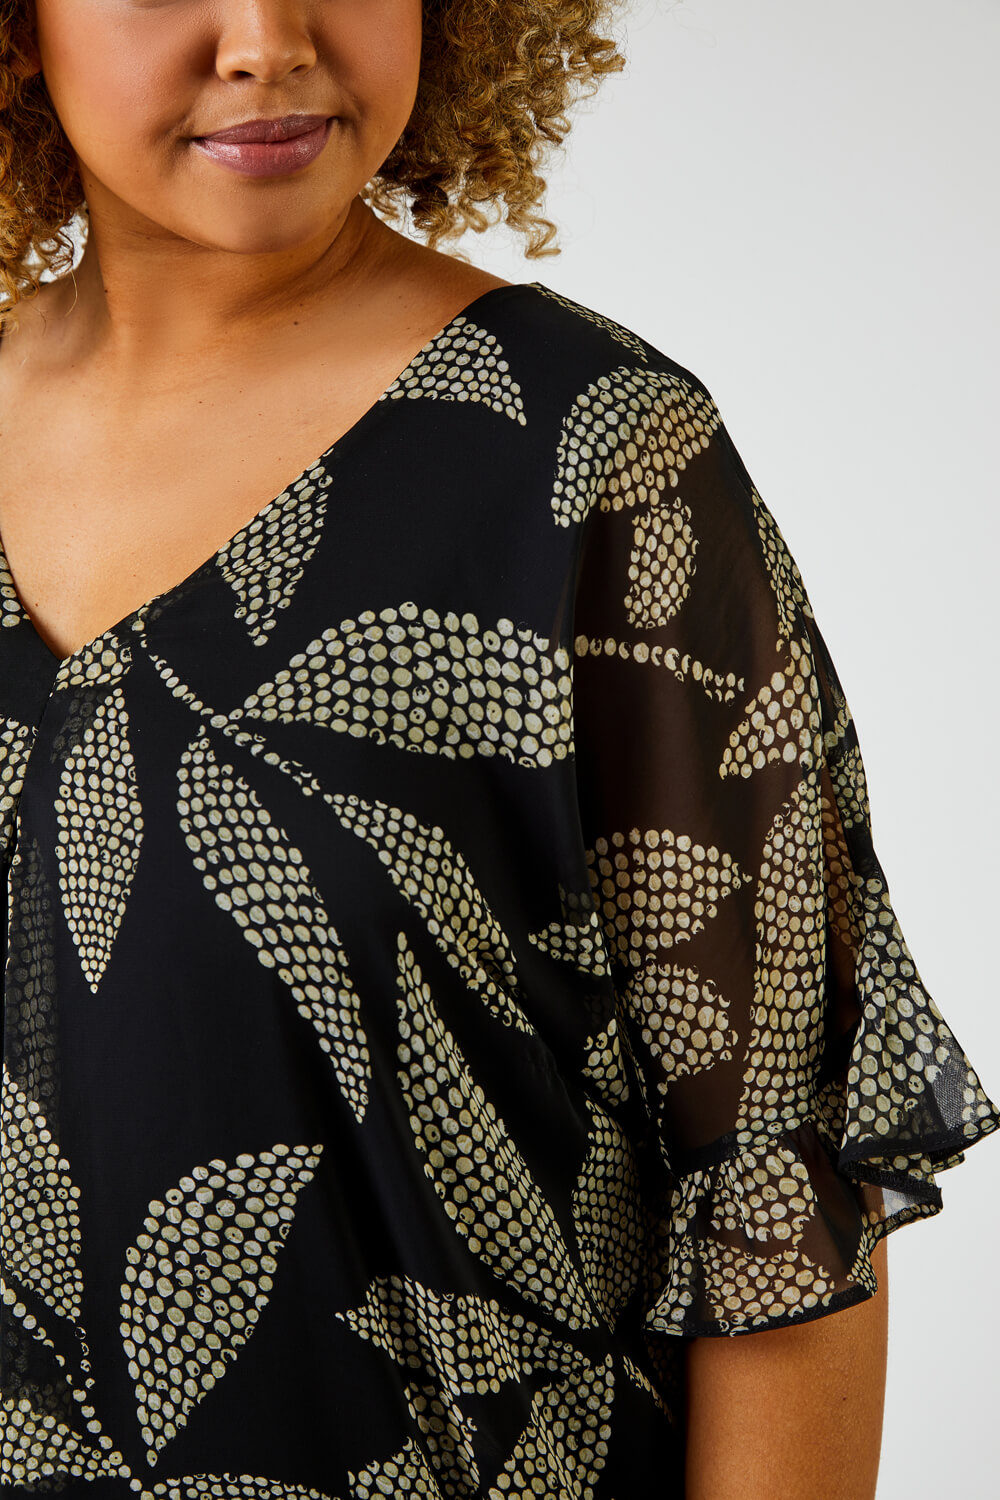 Black Curve Abstract Leaf Print Chiffon Overlay Top, Image 6 of 6